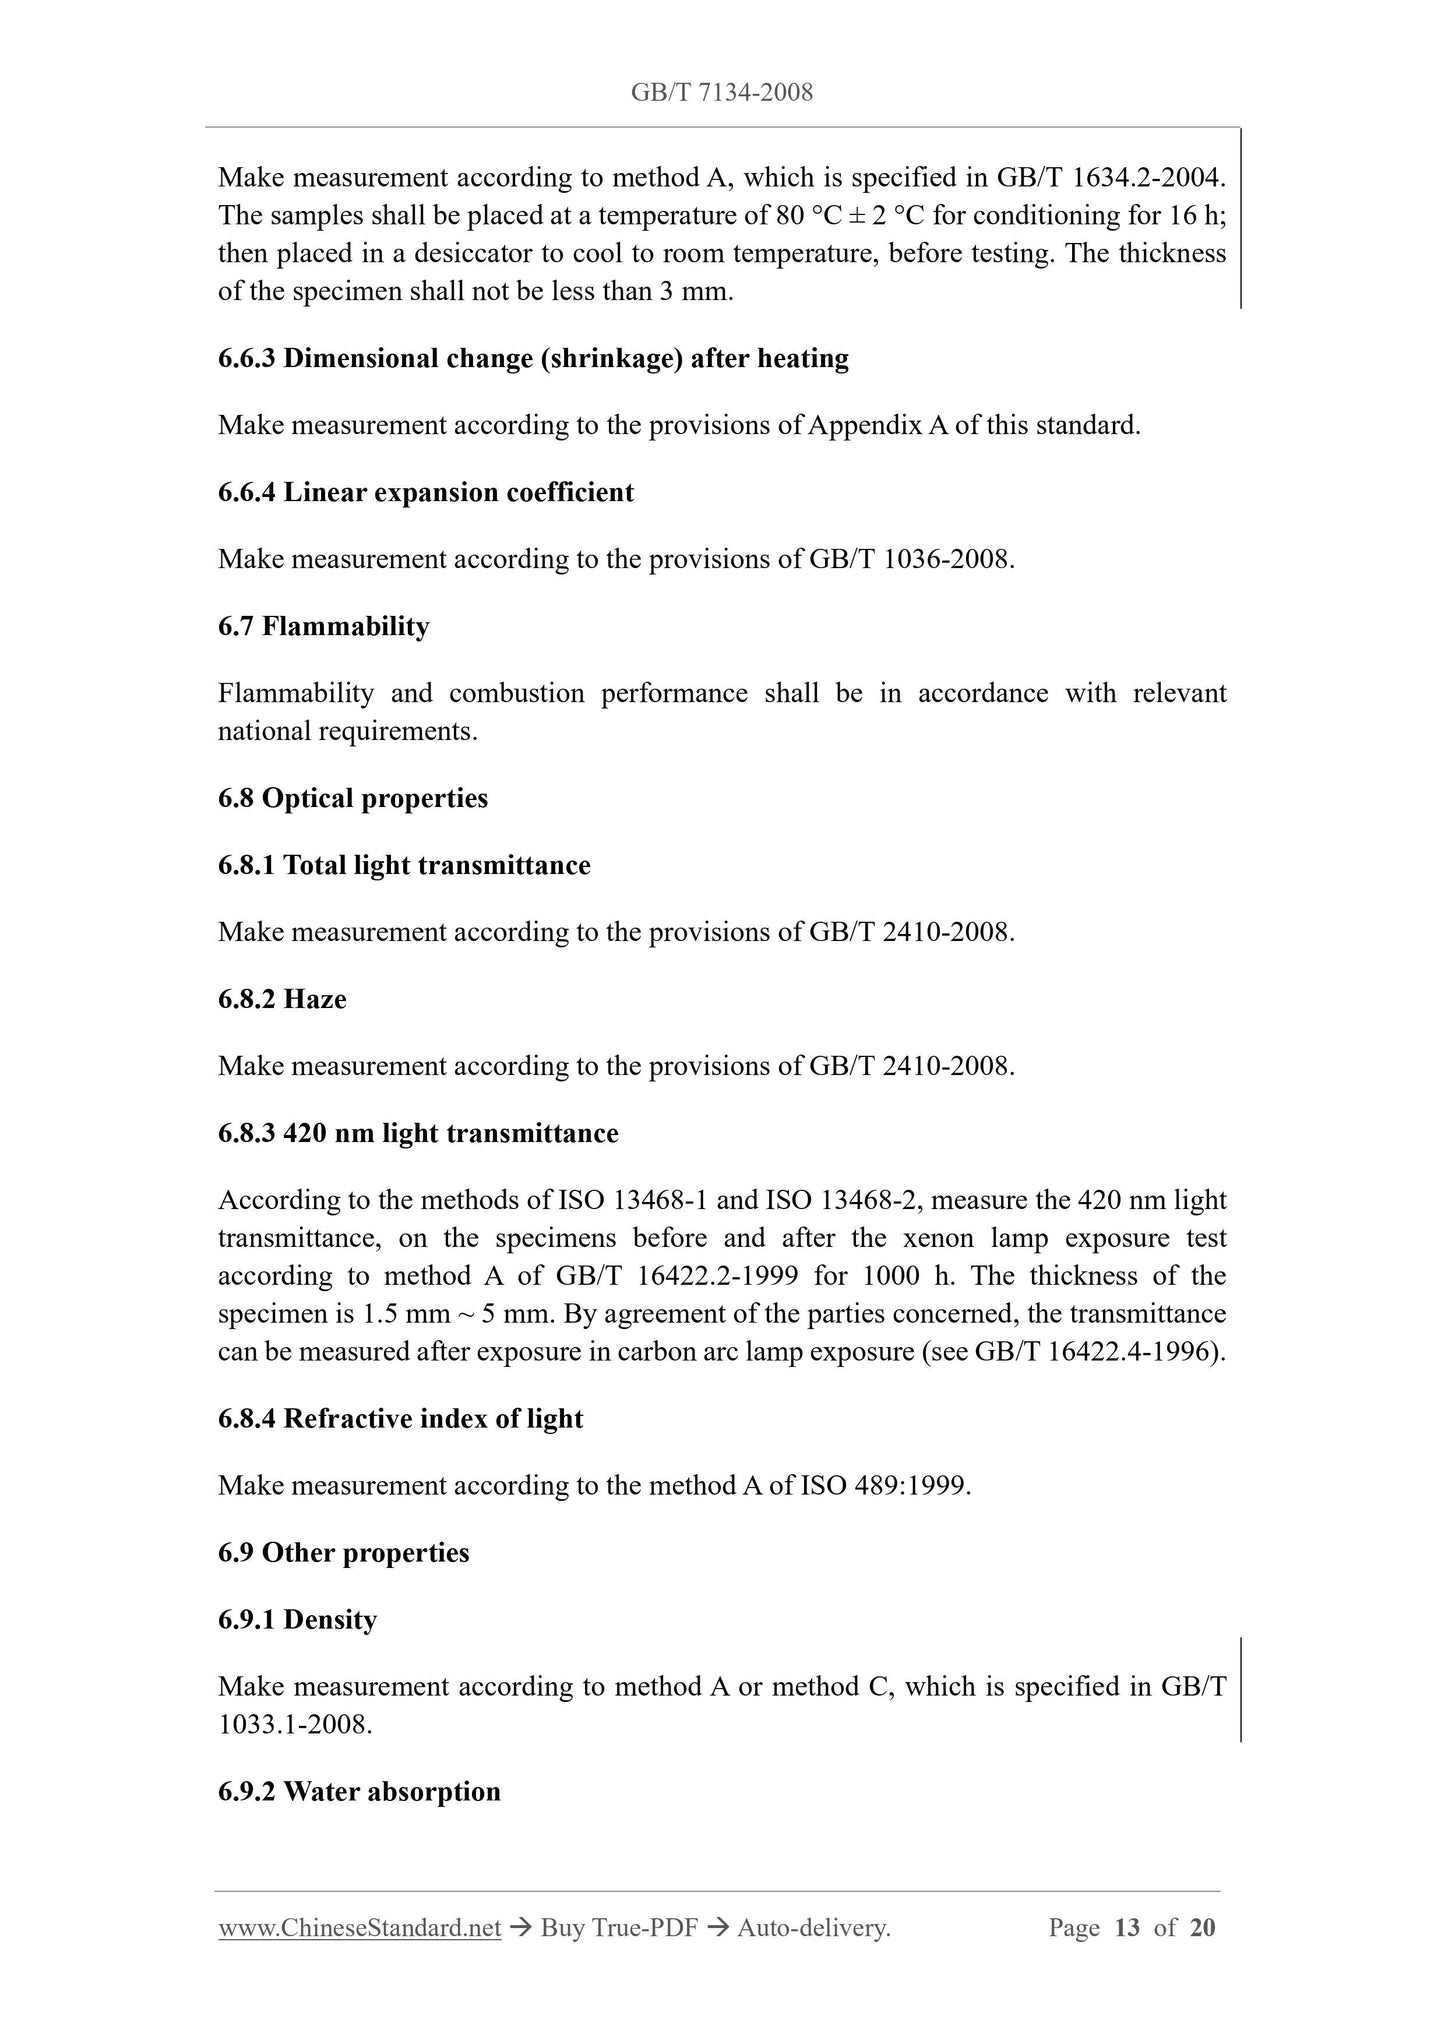 GB/T 7134-2008 Page 6